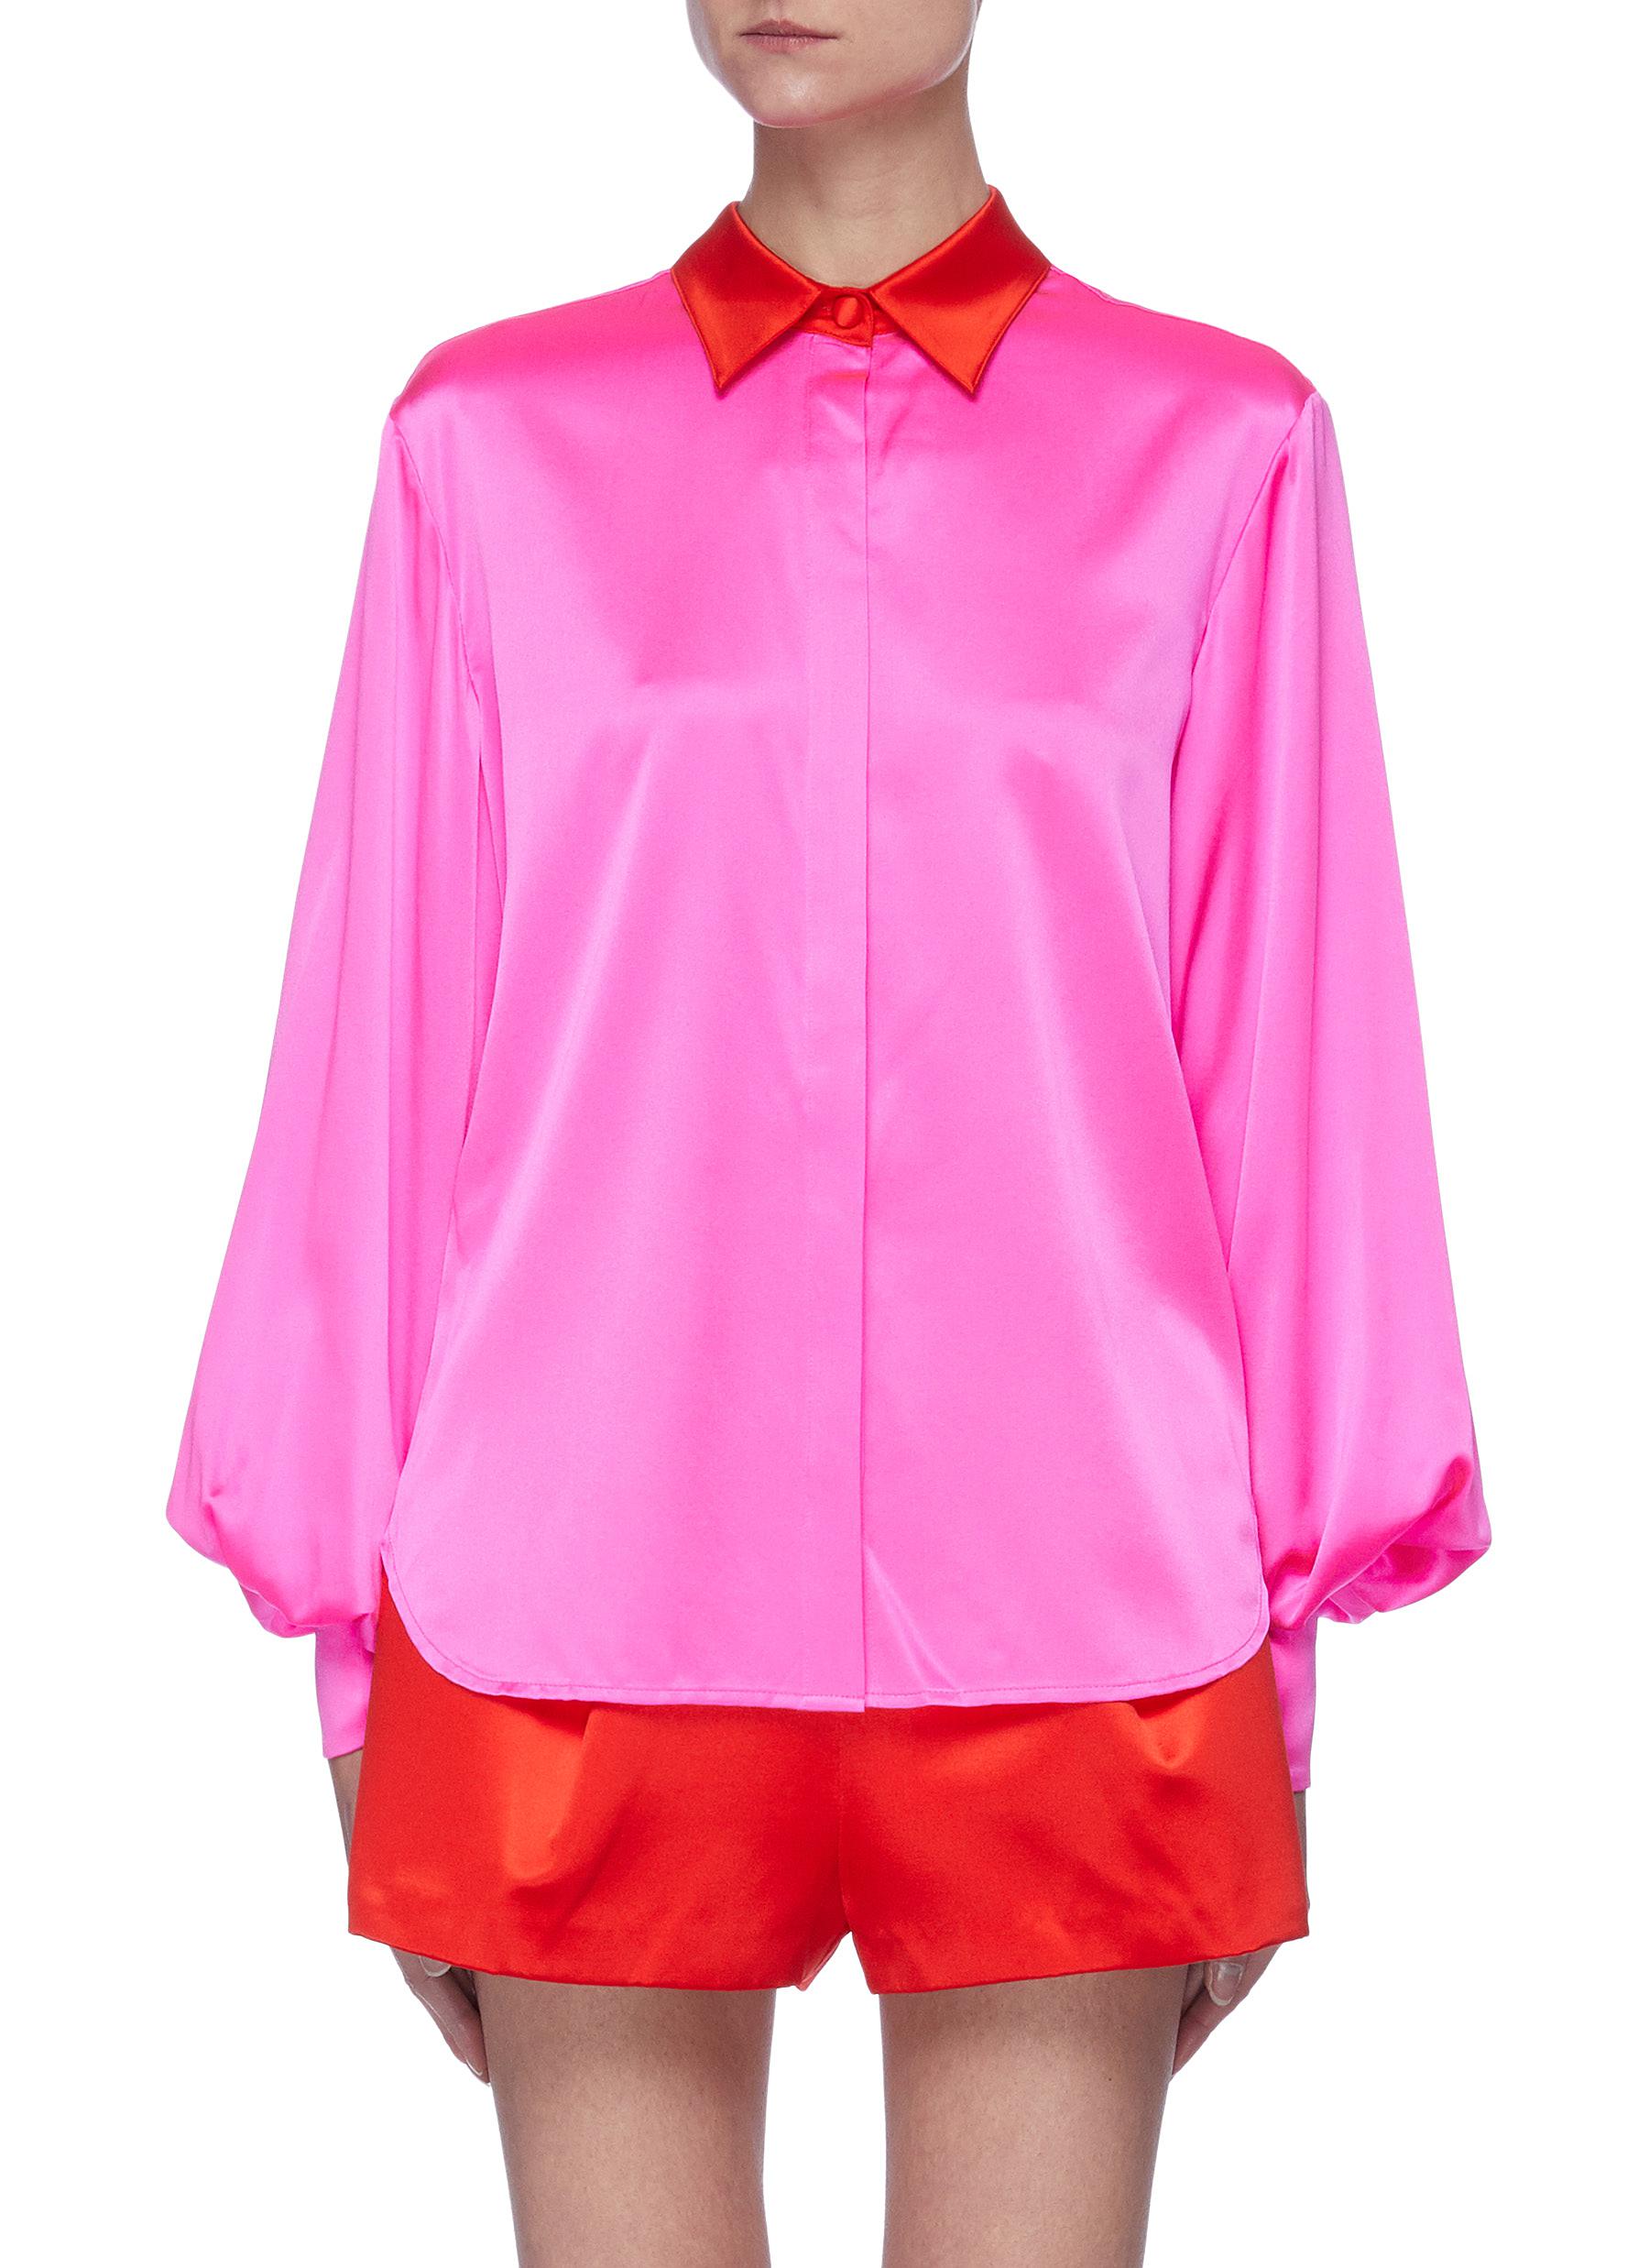 Alex Perry 'sutton' Balloon Sleeve Contrast Collar Satin Shirt In Pink,red